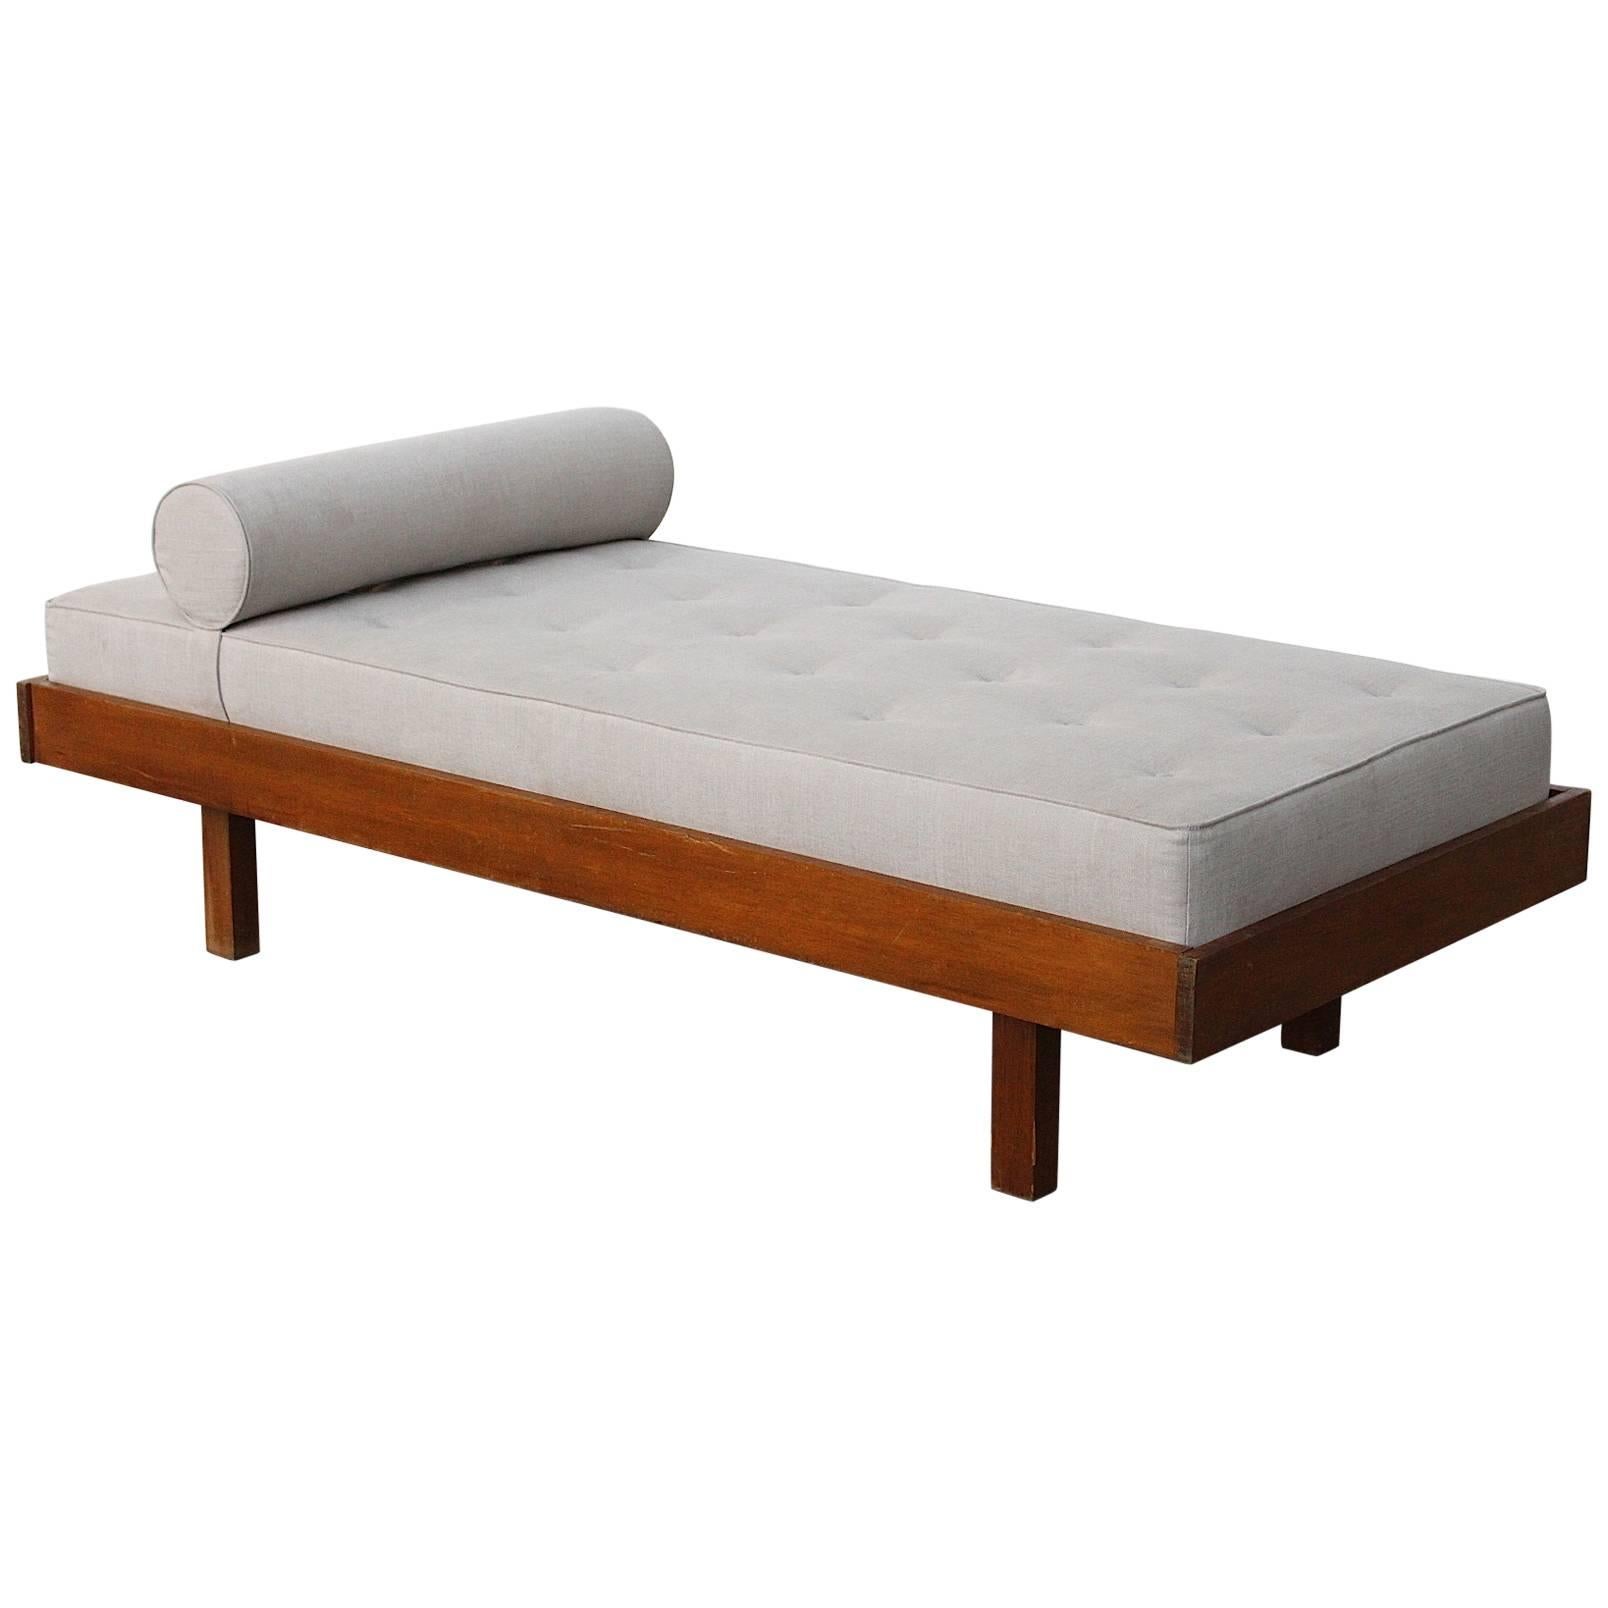 Charlotte Perriand Attributed Daybed, 1950s